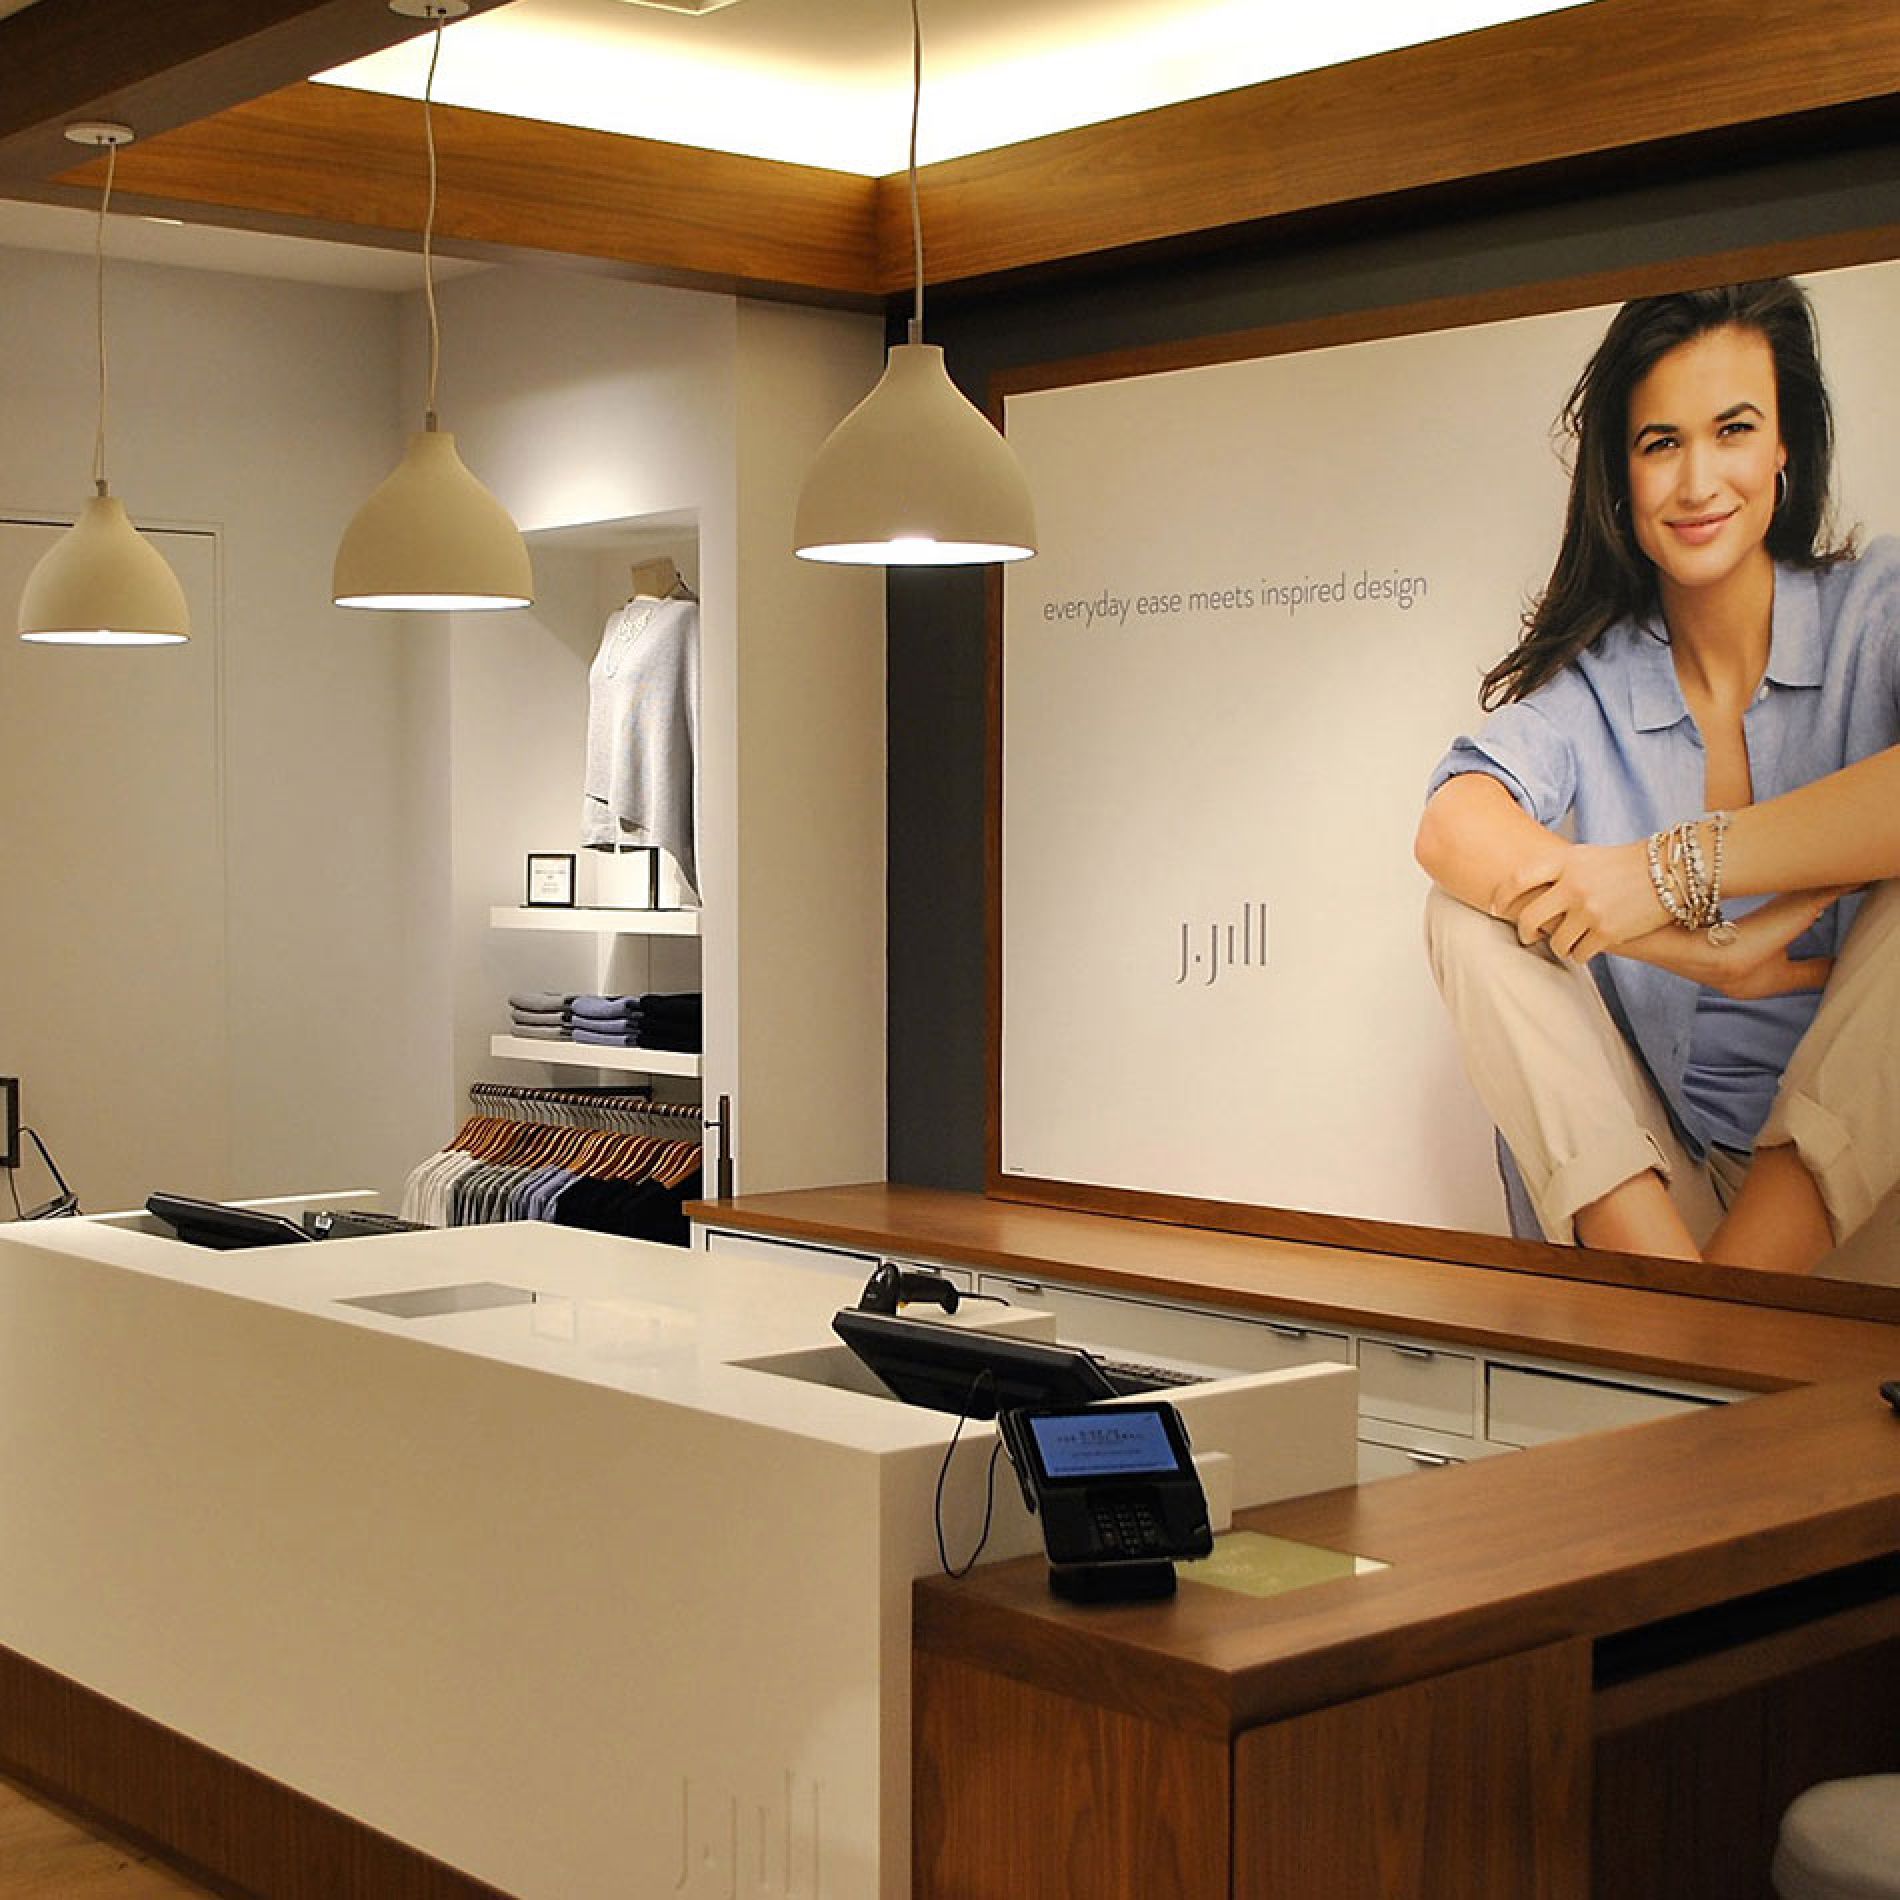 Abercrombie & Fitch Gallery Image